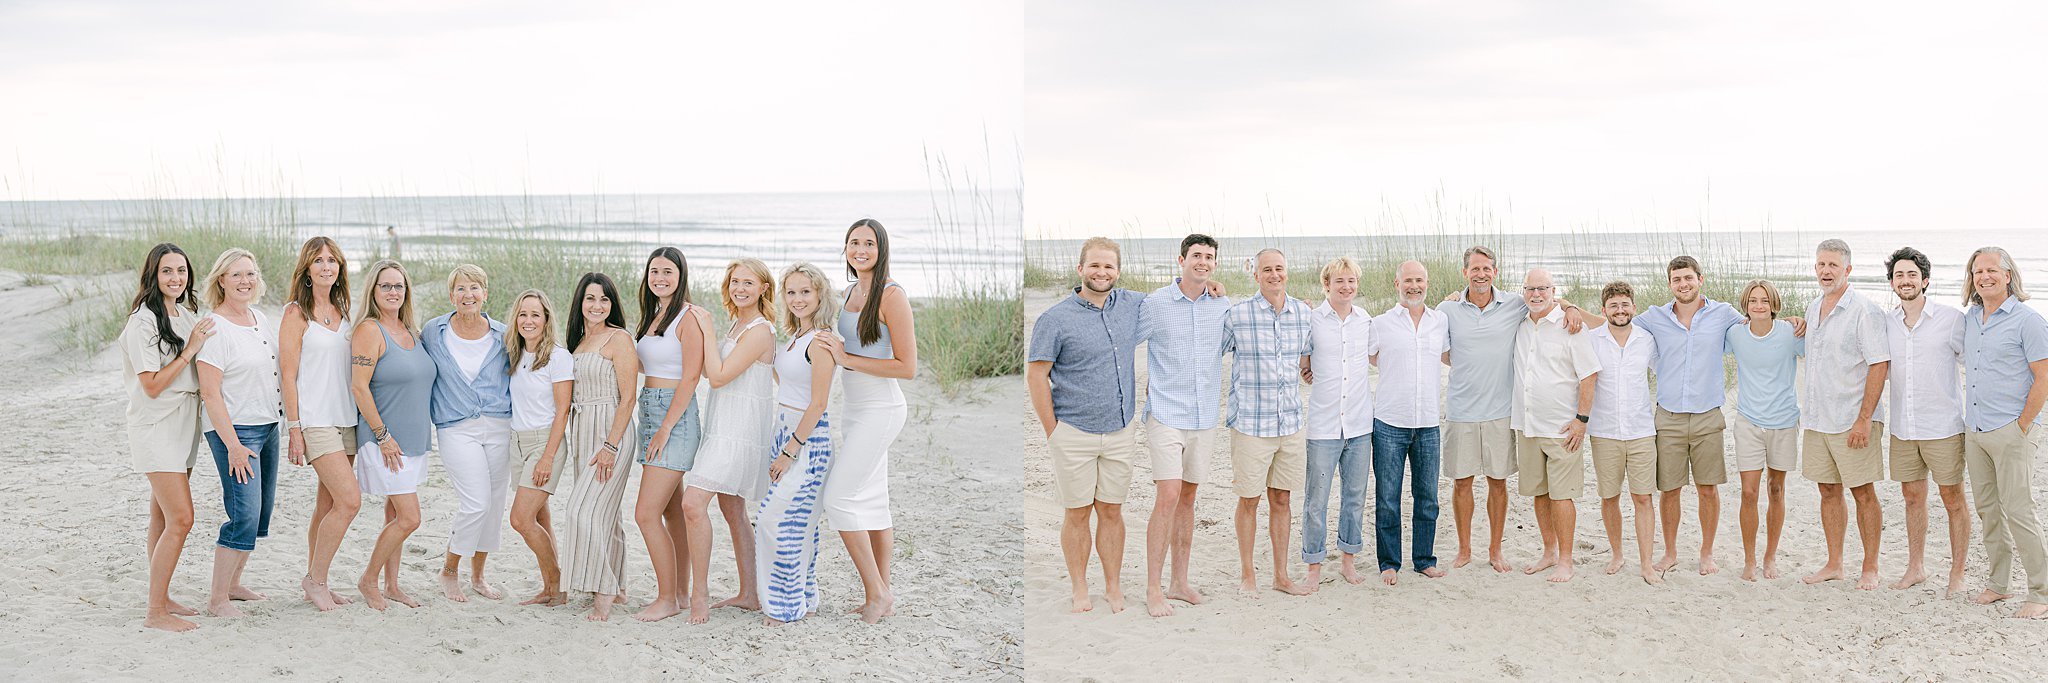 Katherine_Ives_Photography_Albrecht_Extended_Family_HHI_541.JPG